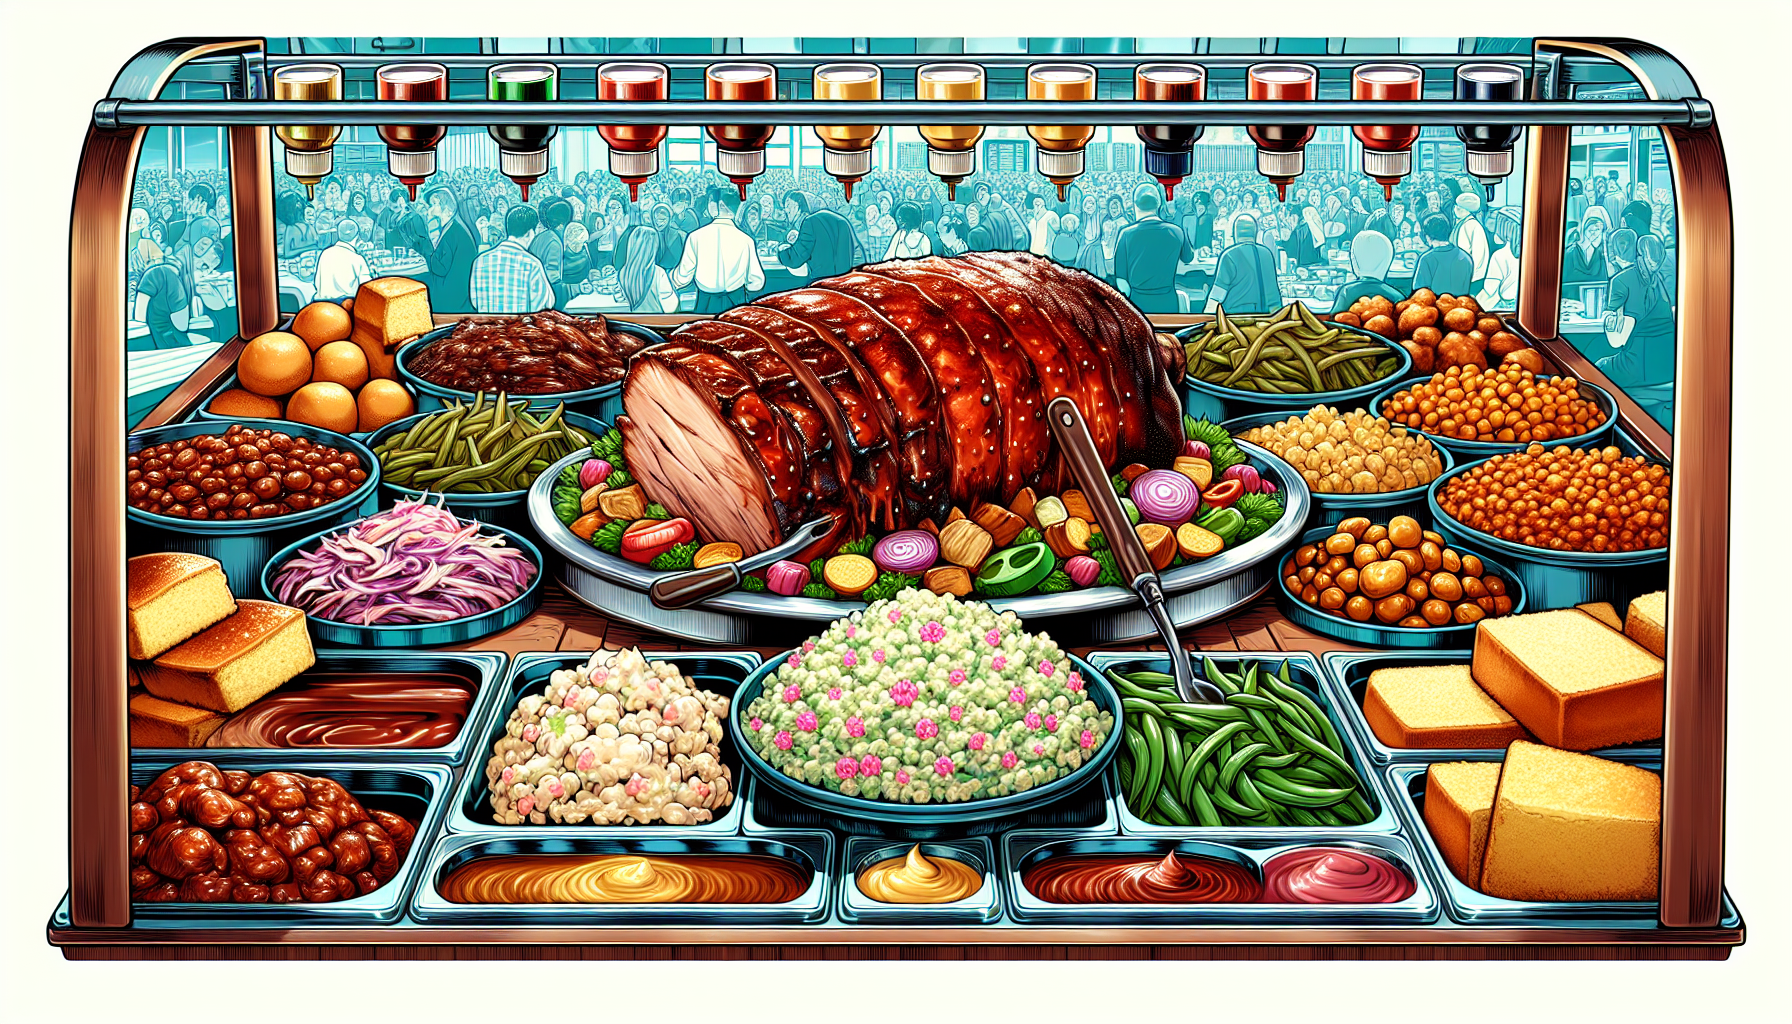 Cartoon-style image of a self-serve buffet with BBQ dishes and sides